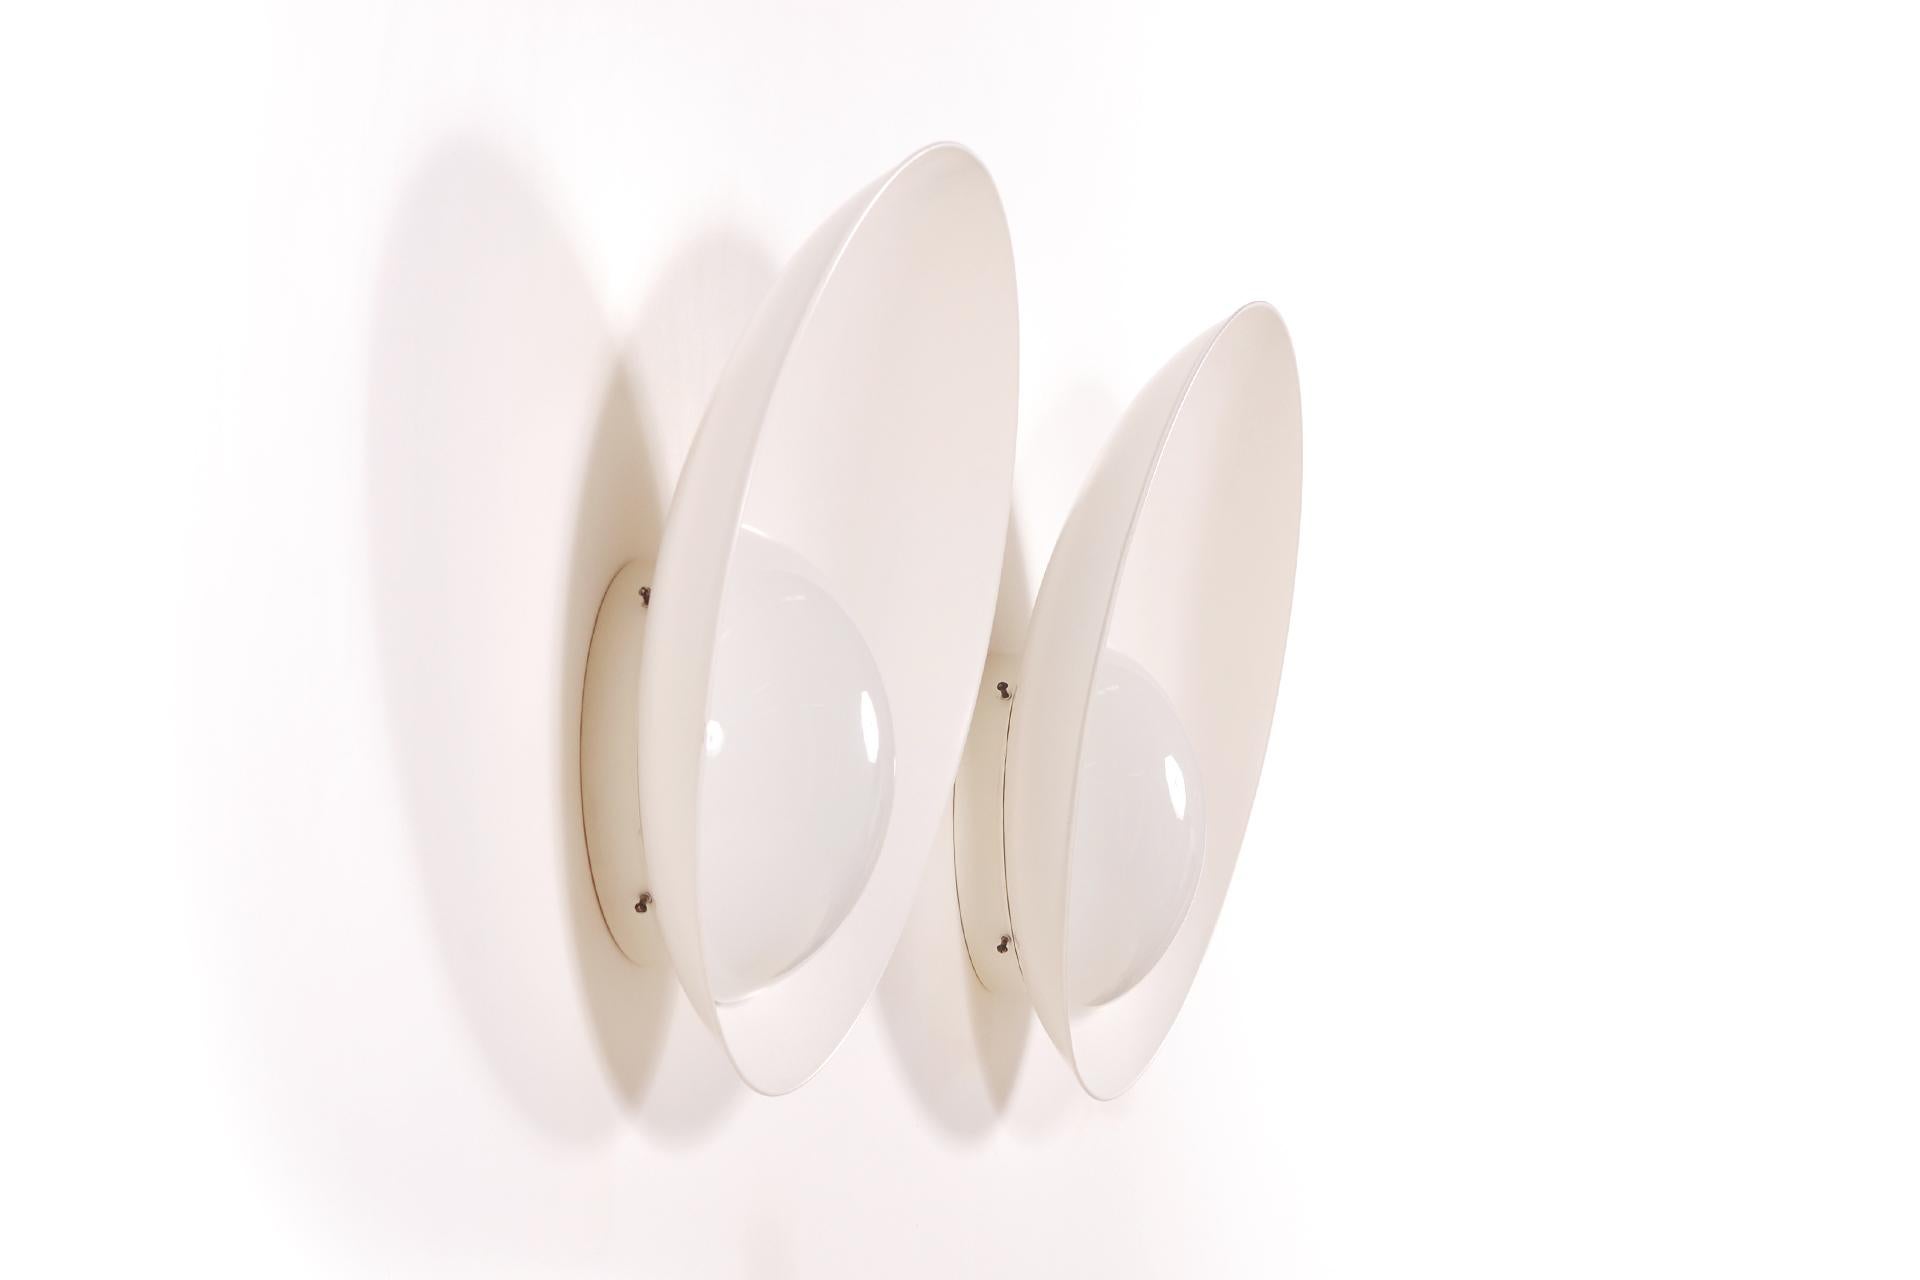 Here is the largest model (60 cm diameter) of the Kastrup Danish airport wall lamp designed by Vilhelm Lauritzen and manufactured by Louis Poulsen, Denmark, 1936. They are made of white painted aluminum and an opaline glass diffuser.